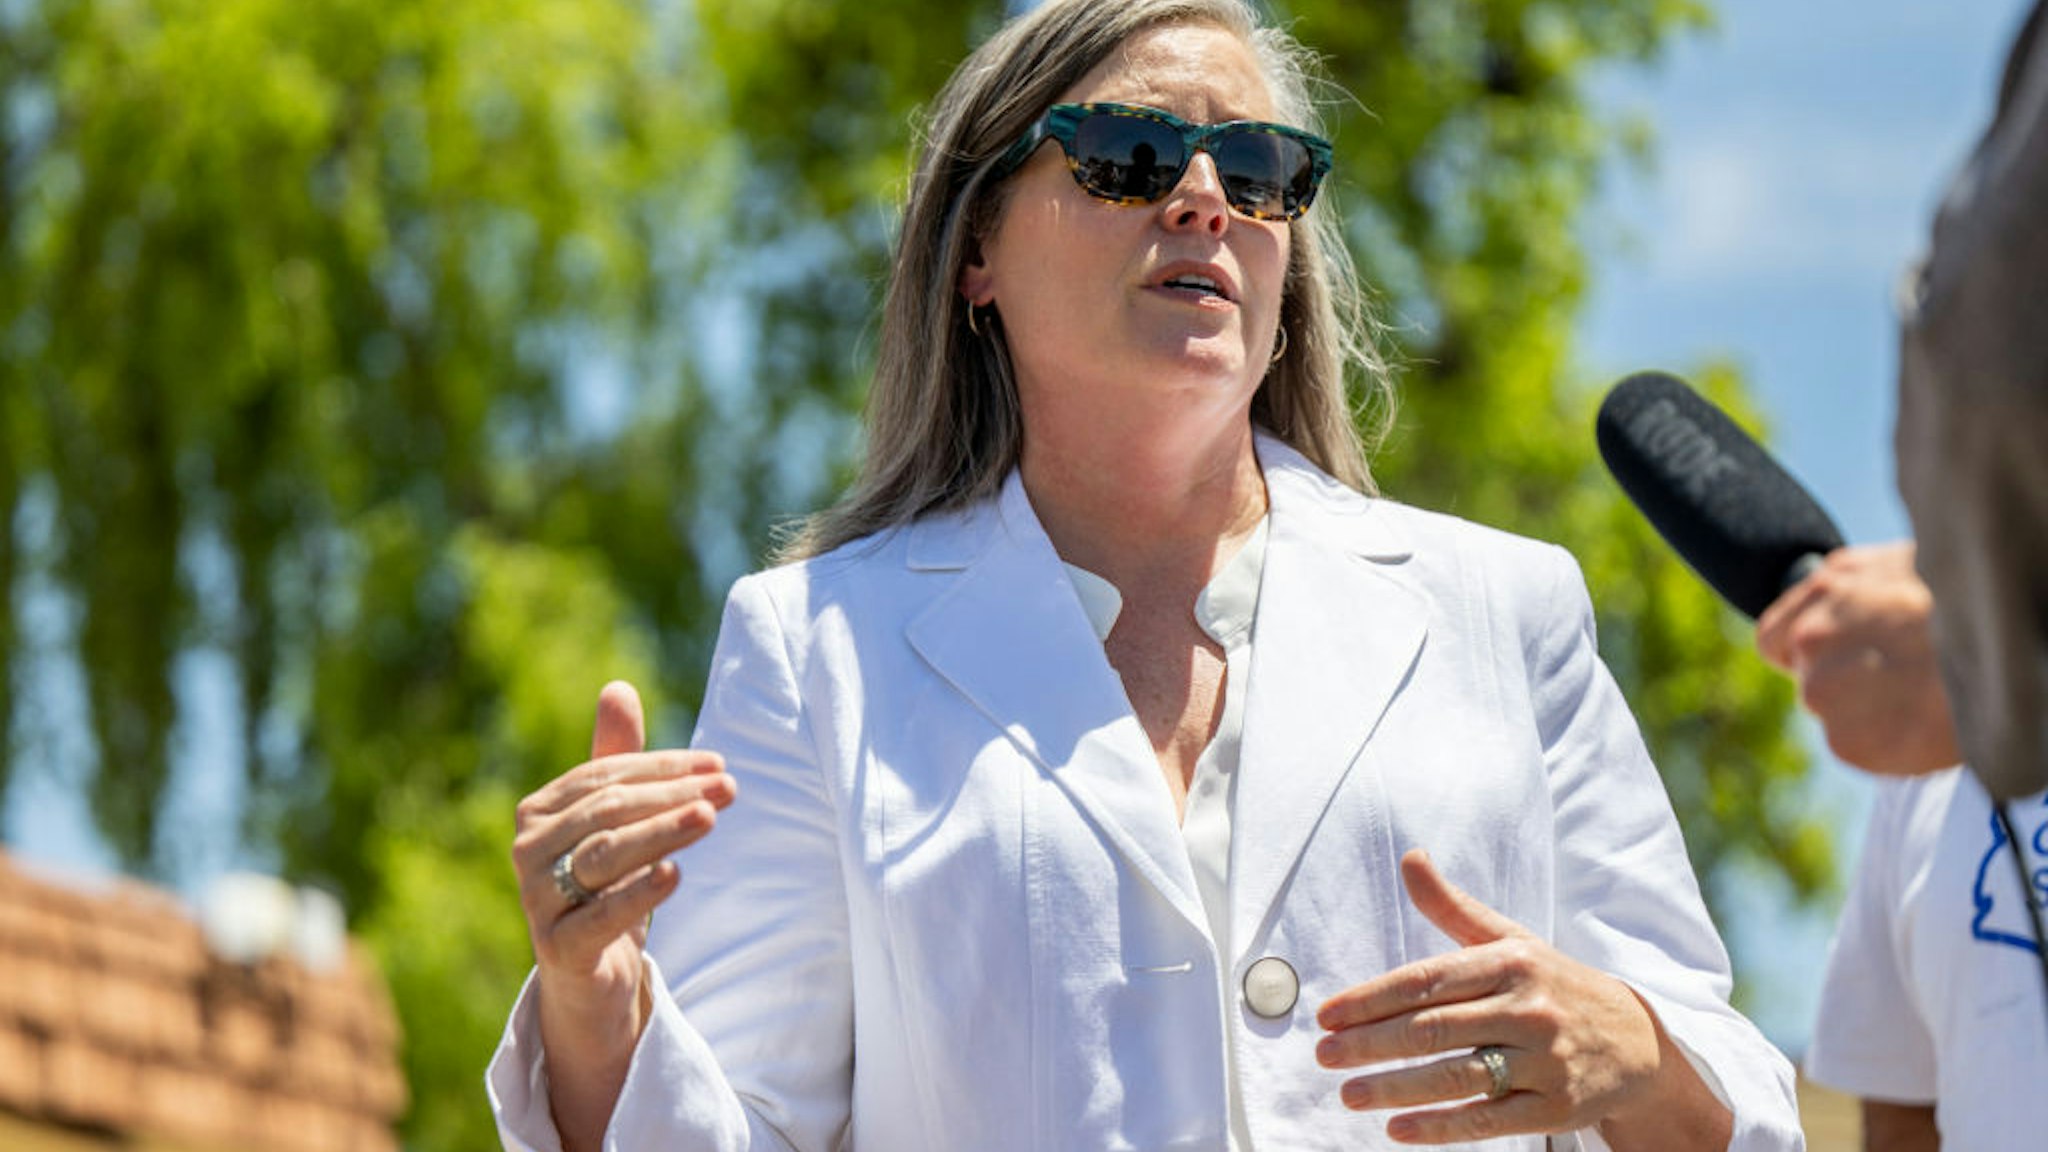 TOLLESON, ARIZONA - AUGUST 02: Arizona Secretary of State and candidate for governor Katie Hobbs speaks to reporters at a news conference on August 02, 2022 in Tolleson, Arizona. Hobbs is up against Republican gubernatorial candidate Kari Lake and lobbyist Karrin Taylor Robson in this year's primary. (Photo by Brandon Bell/Getty Images)